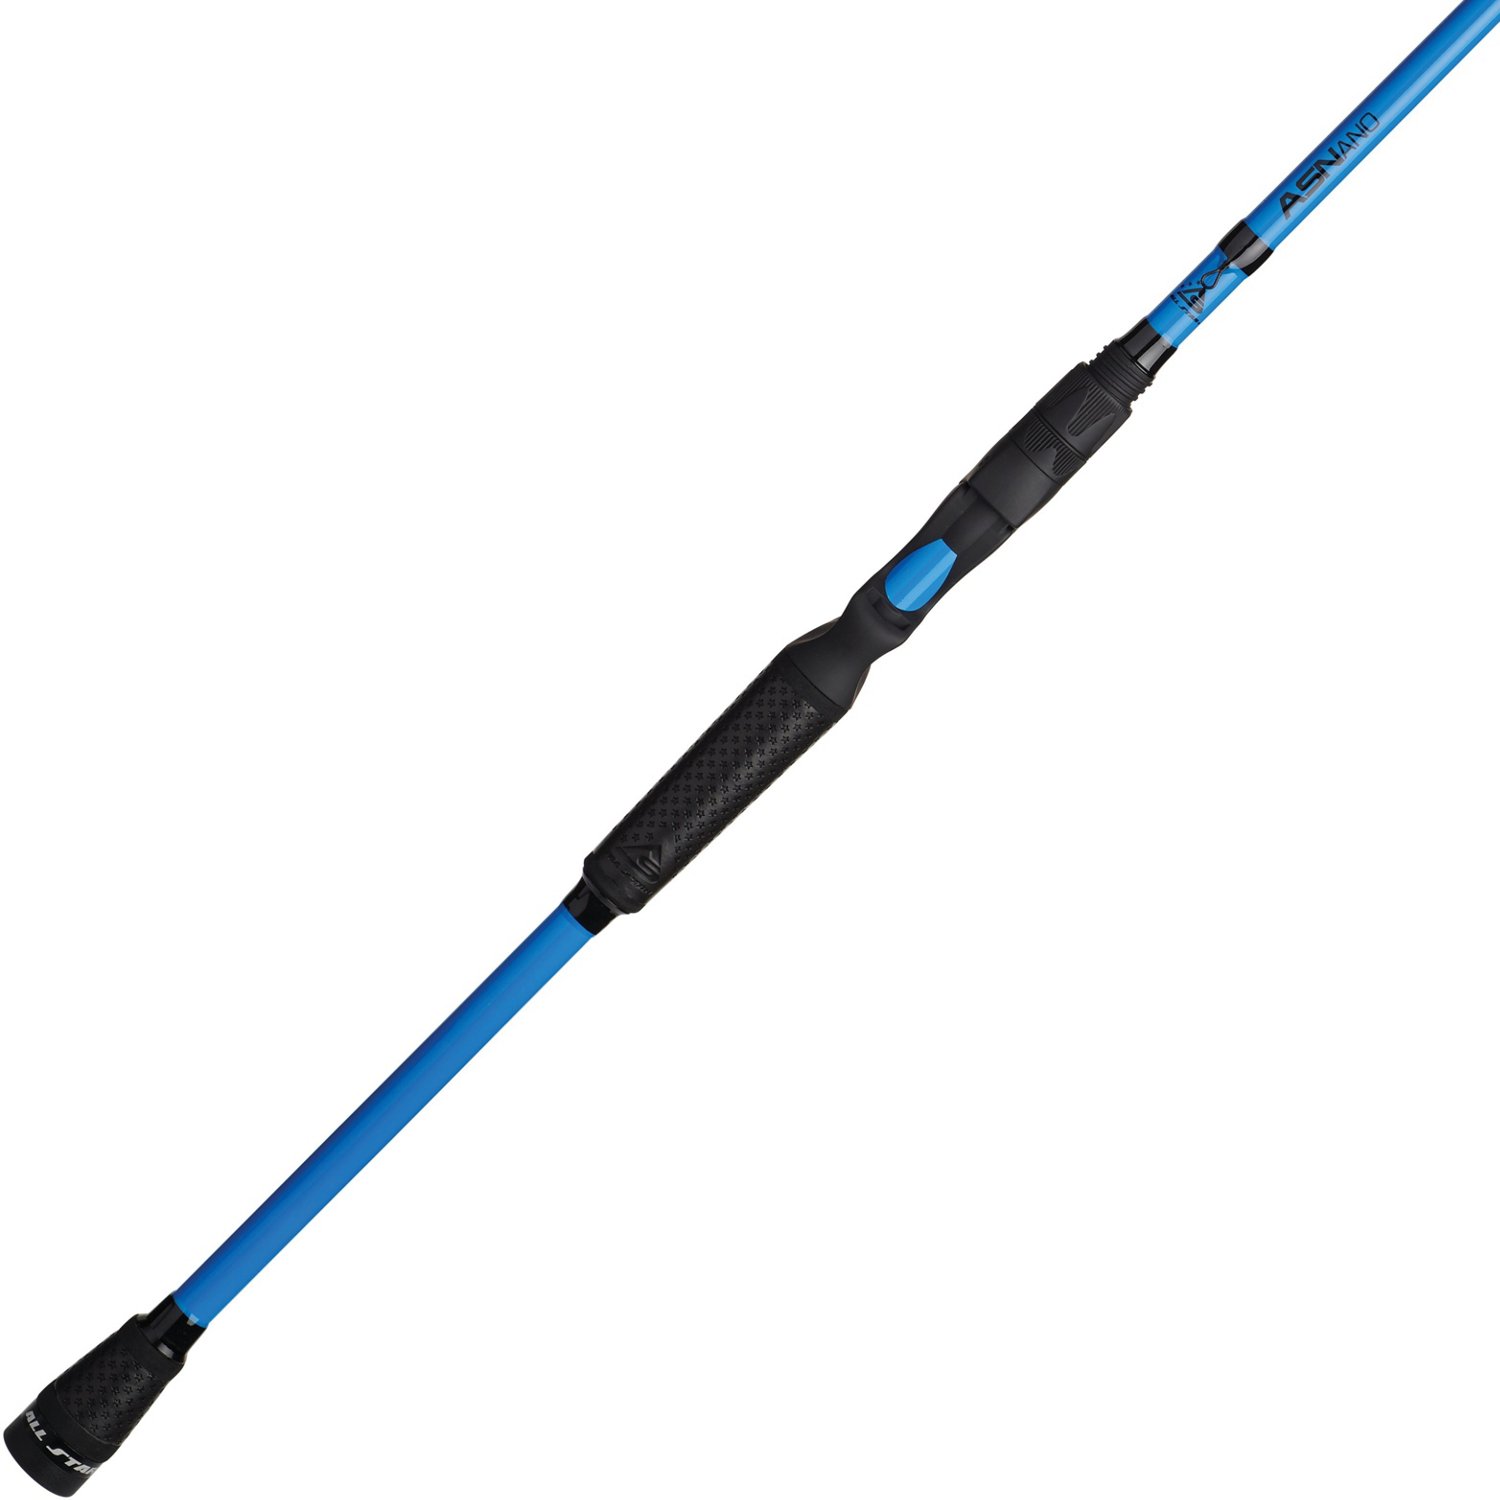 Academy Sports + Outdoors All Star Rods Team 3 Spinning Rod